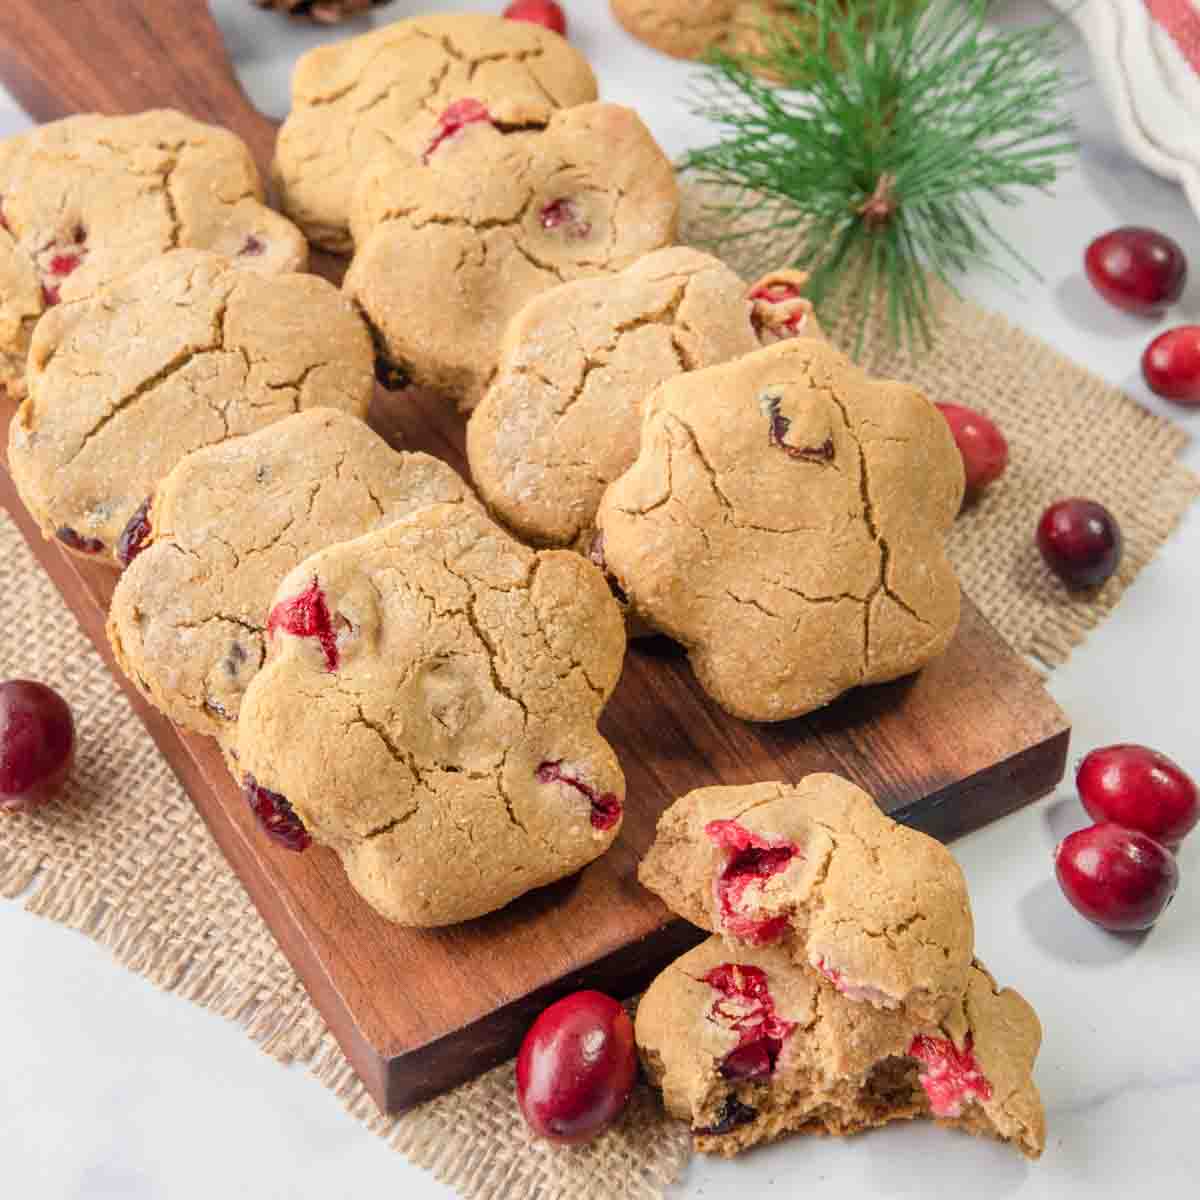 homemade cranberry dog treats on a small wood board.